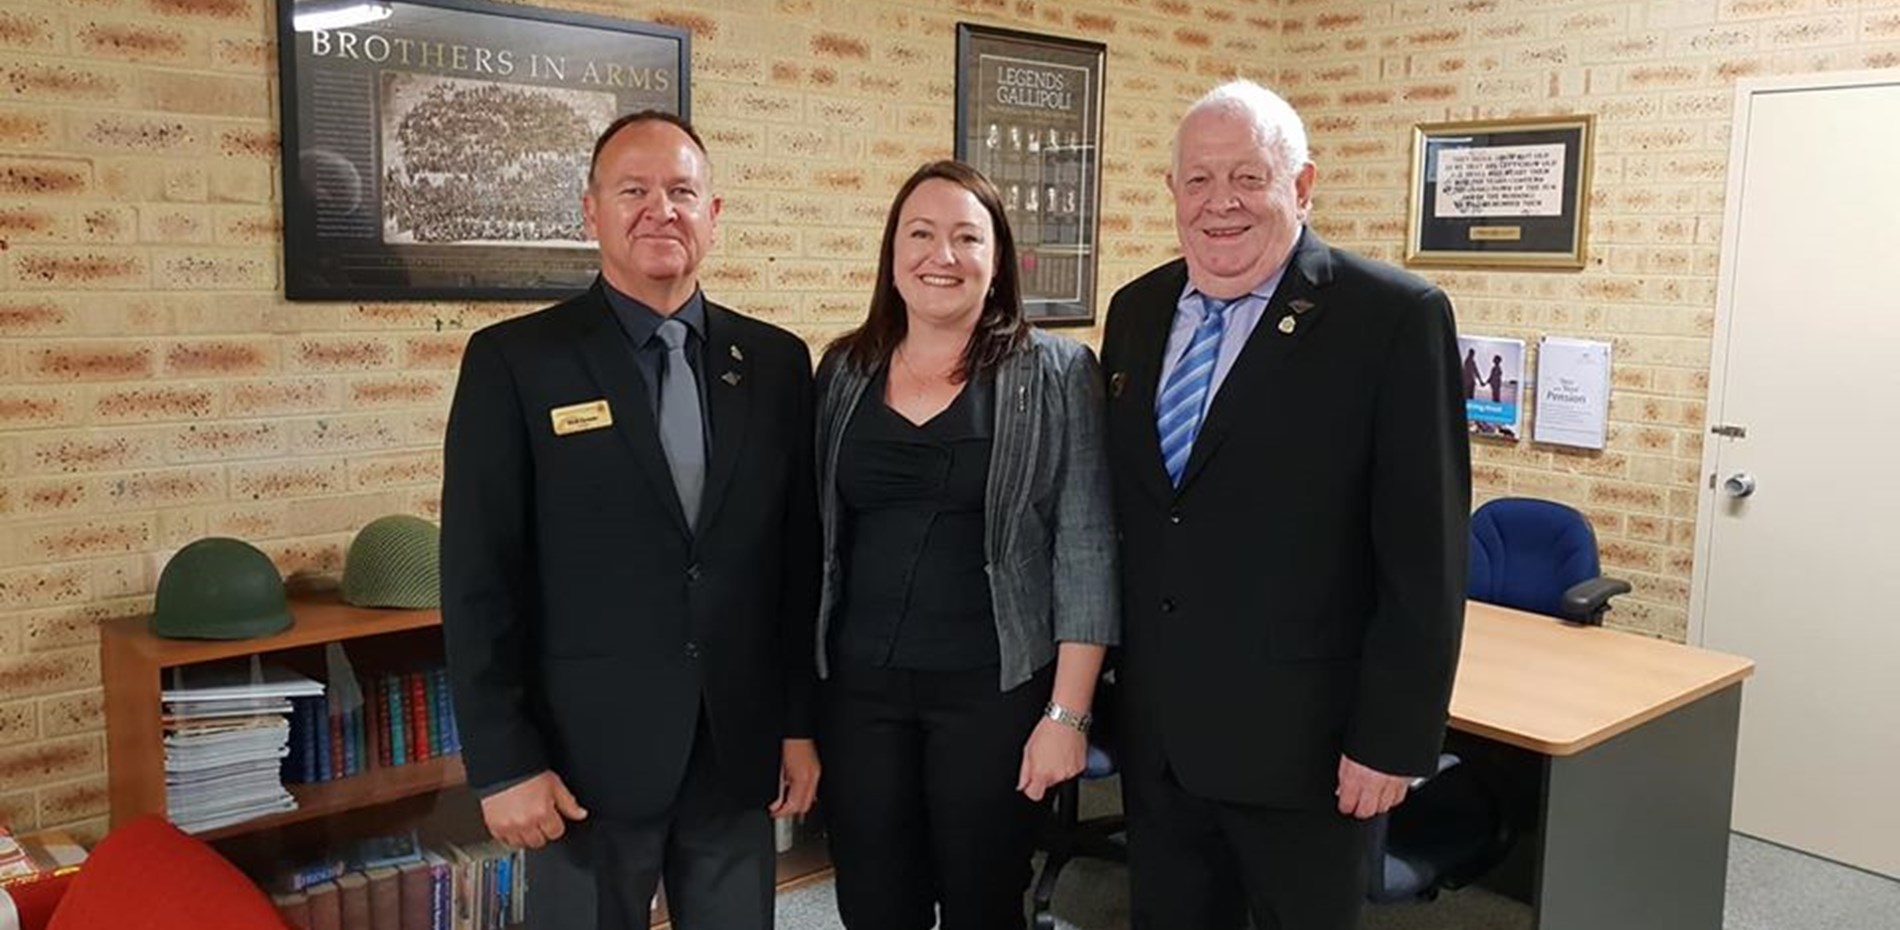 A re-elected McGowan Government will contribute $40,000 to fund IT upgrades and purchase a new courtesy car at the RSLWA’s Veterans Support Centre Joondalup. Main Image